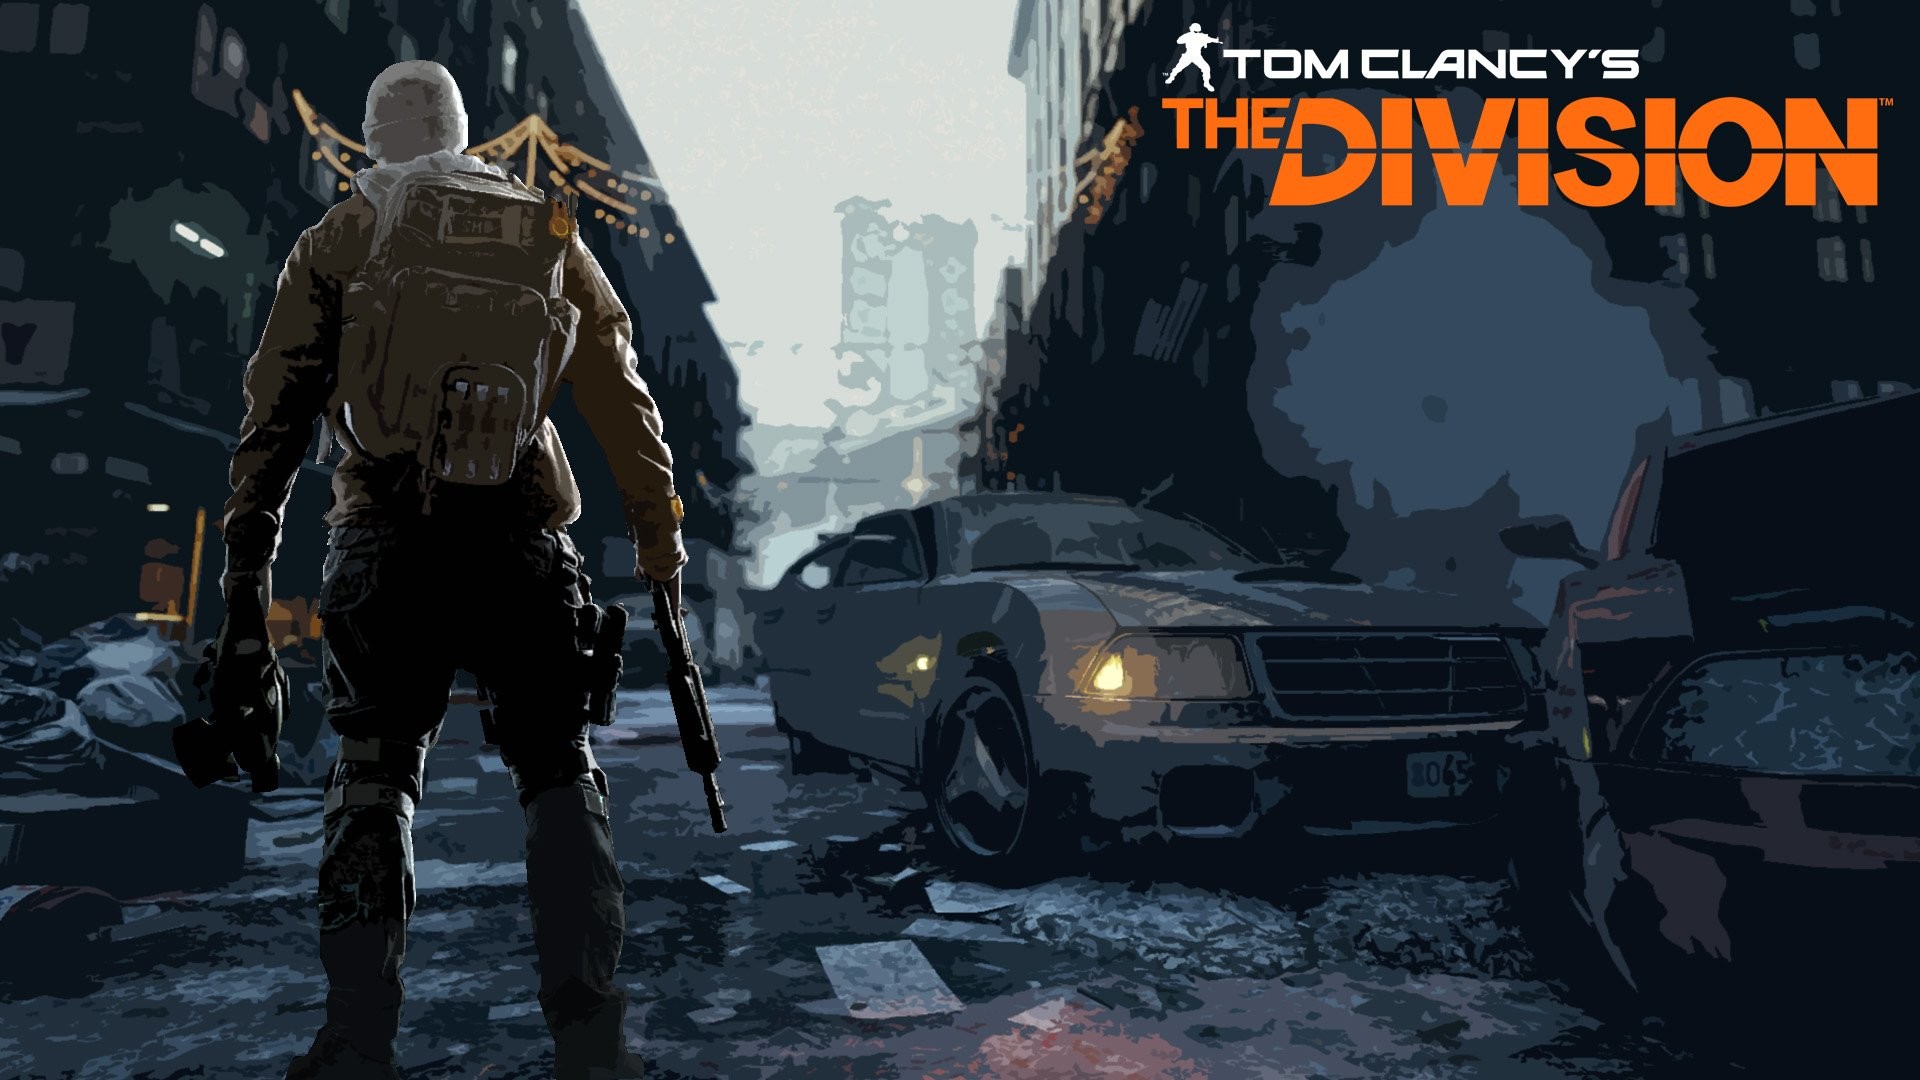 1920x1080 Download Tom Clancys The Division Wallpaper Awesome Images #180qp8d246   px 235.57 KB Games Tom